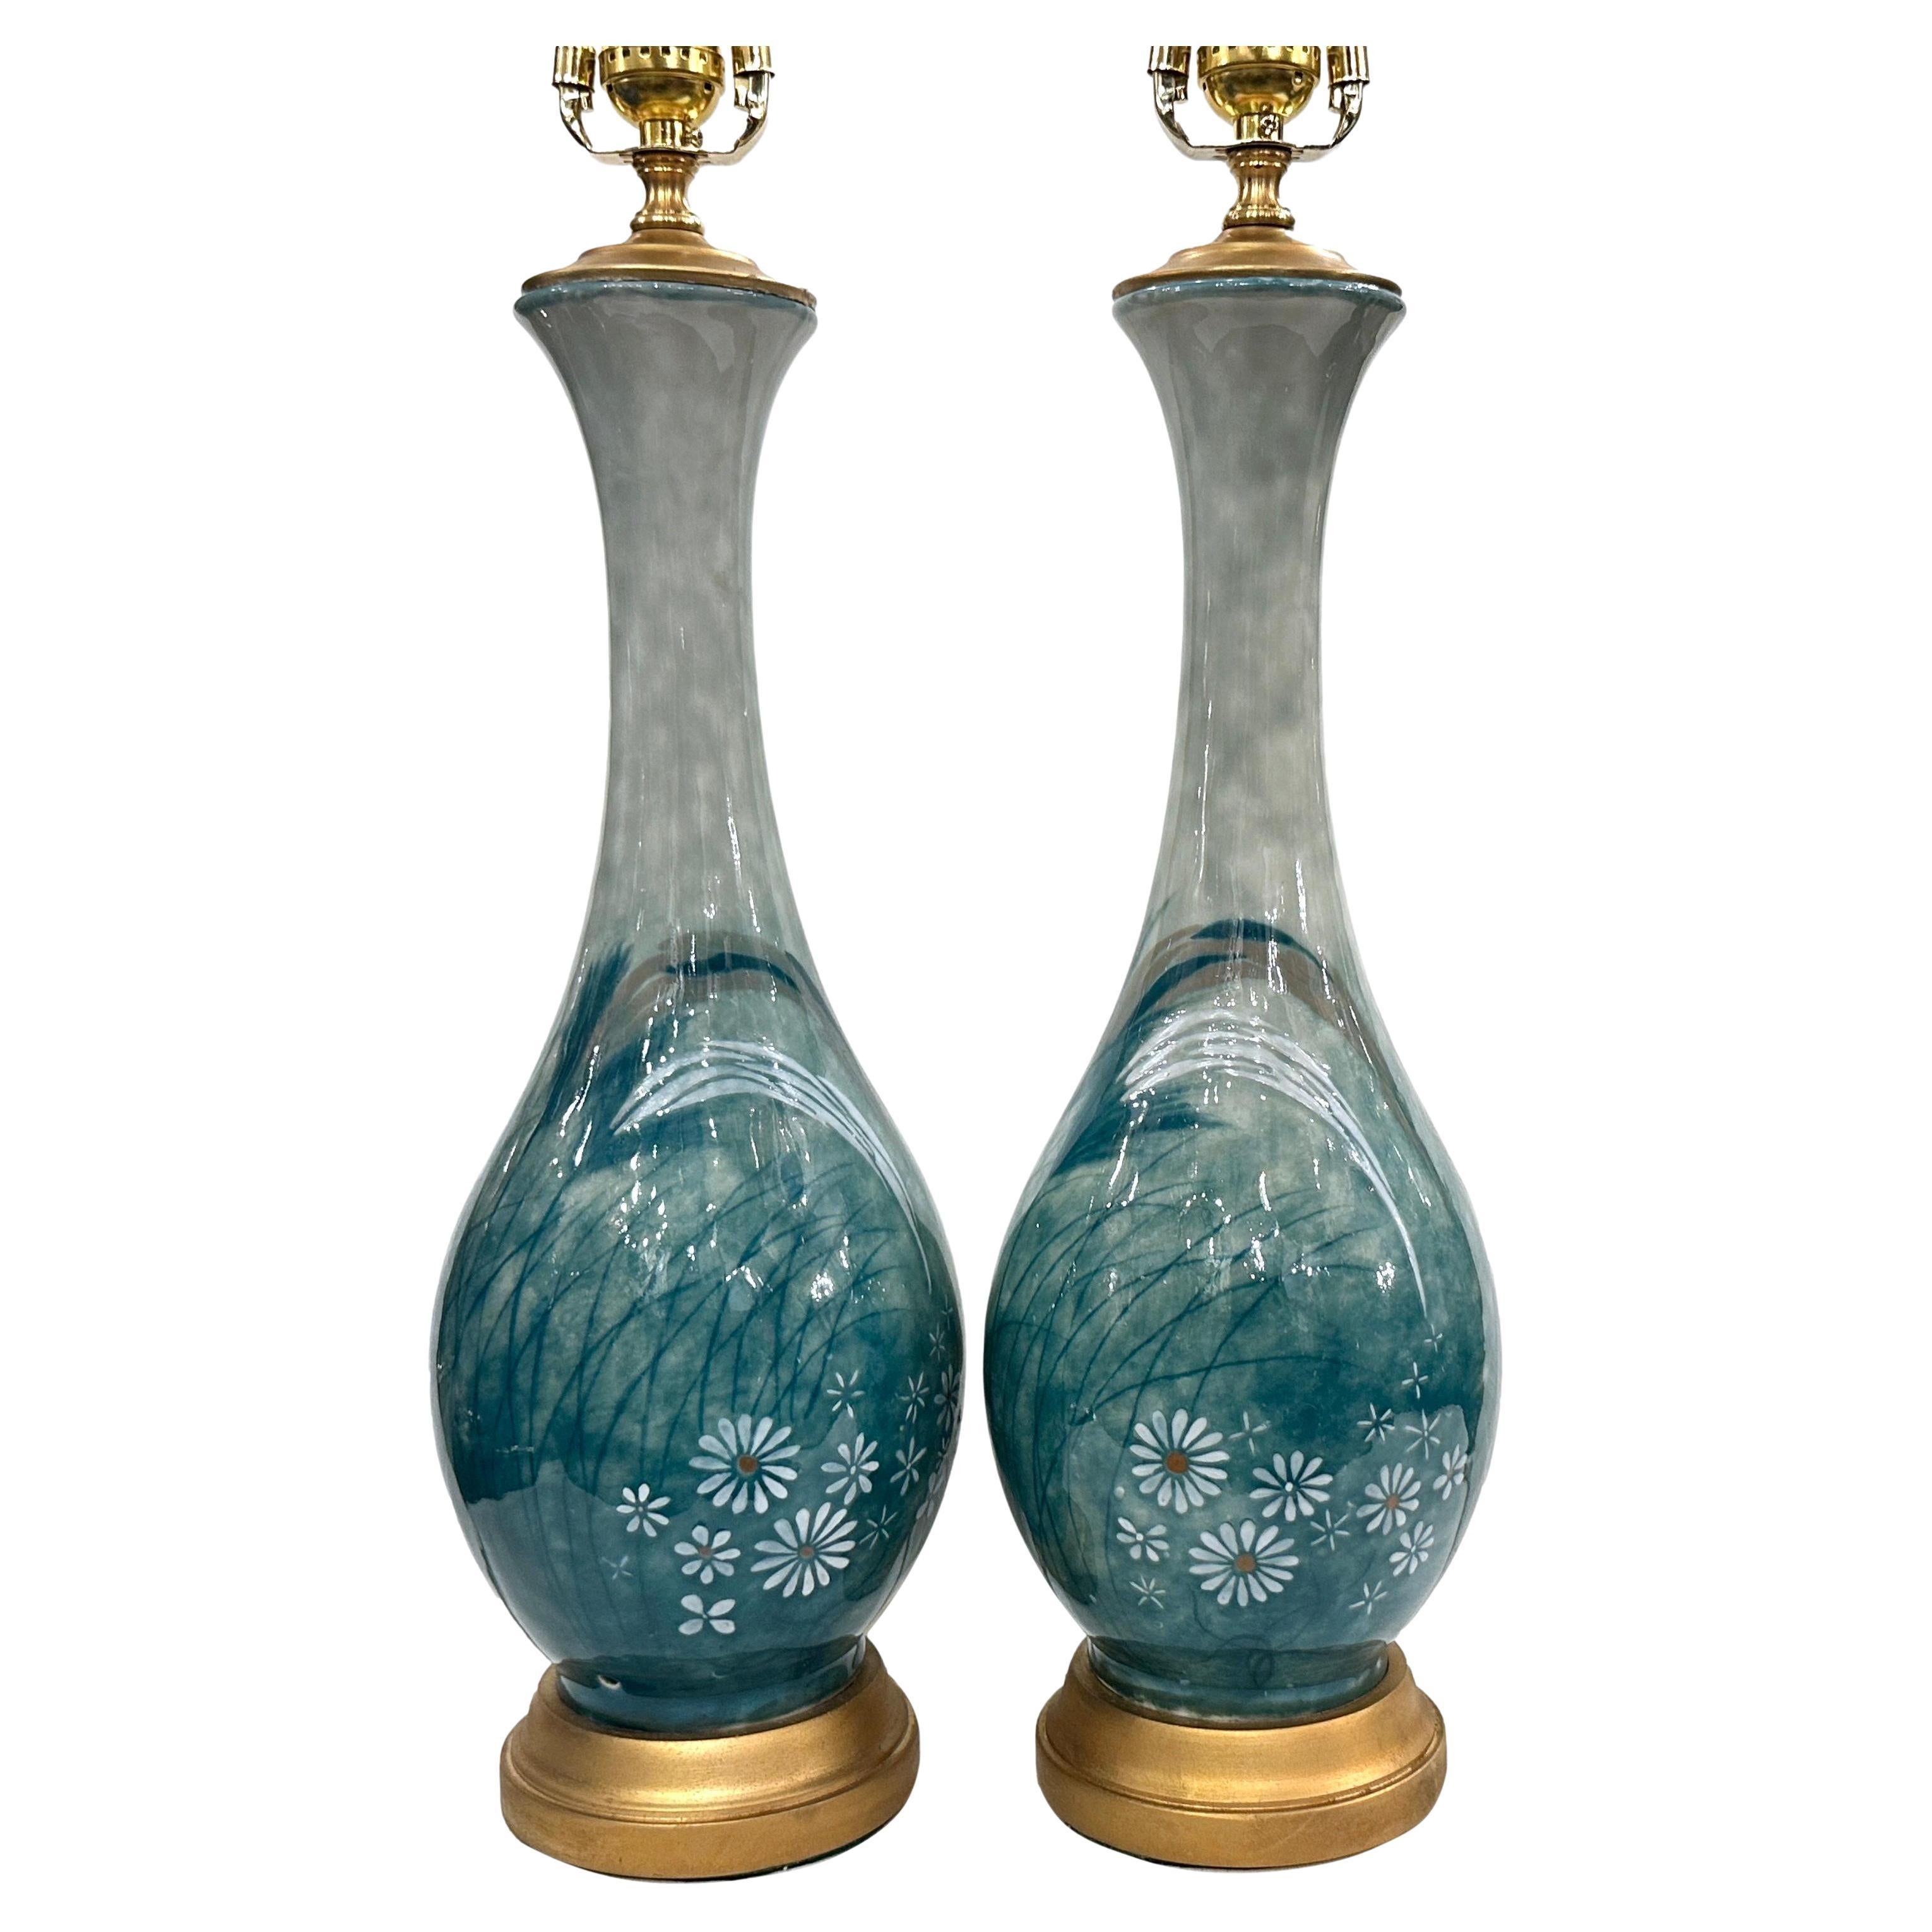 Pair of circa 1950's French porcelain table lamps with floral decoration 

Measurements:
Height of body: 18